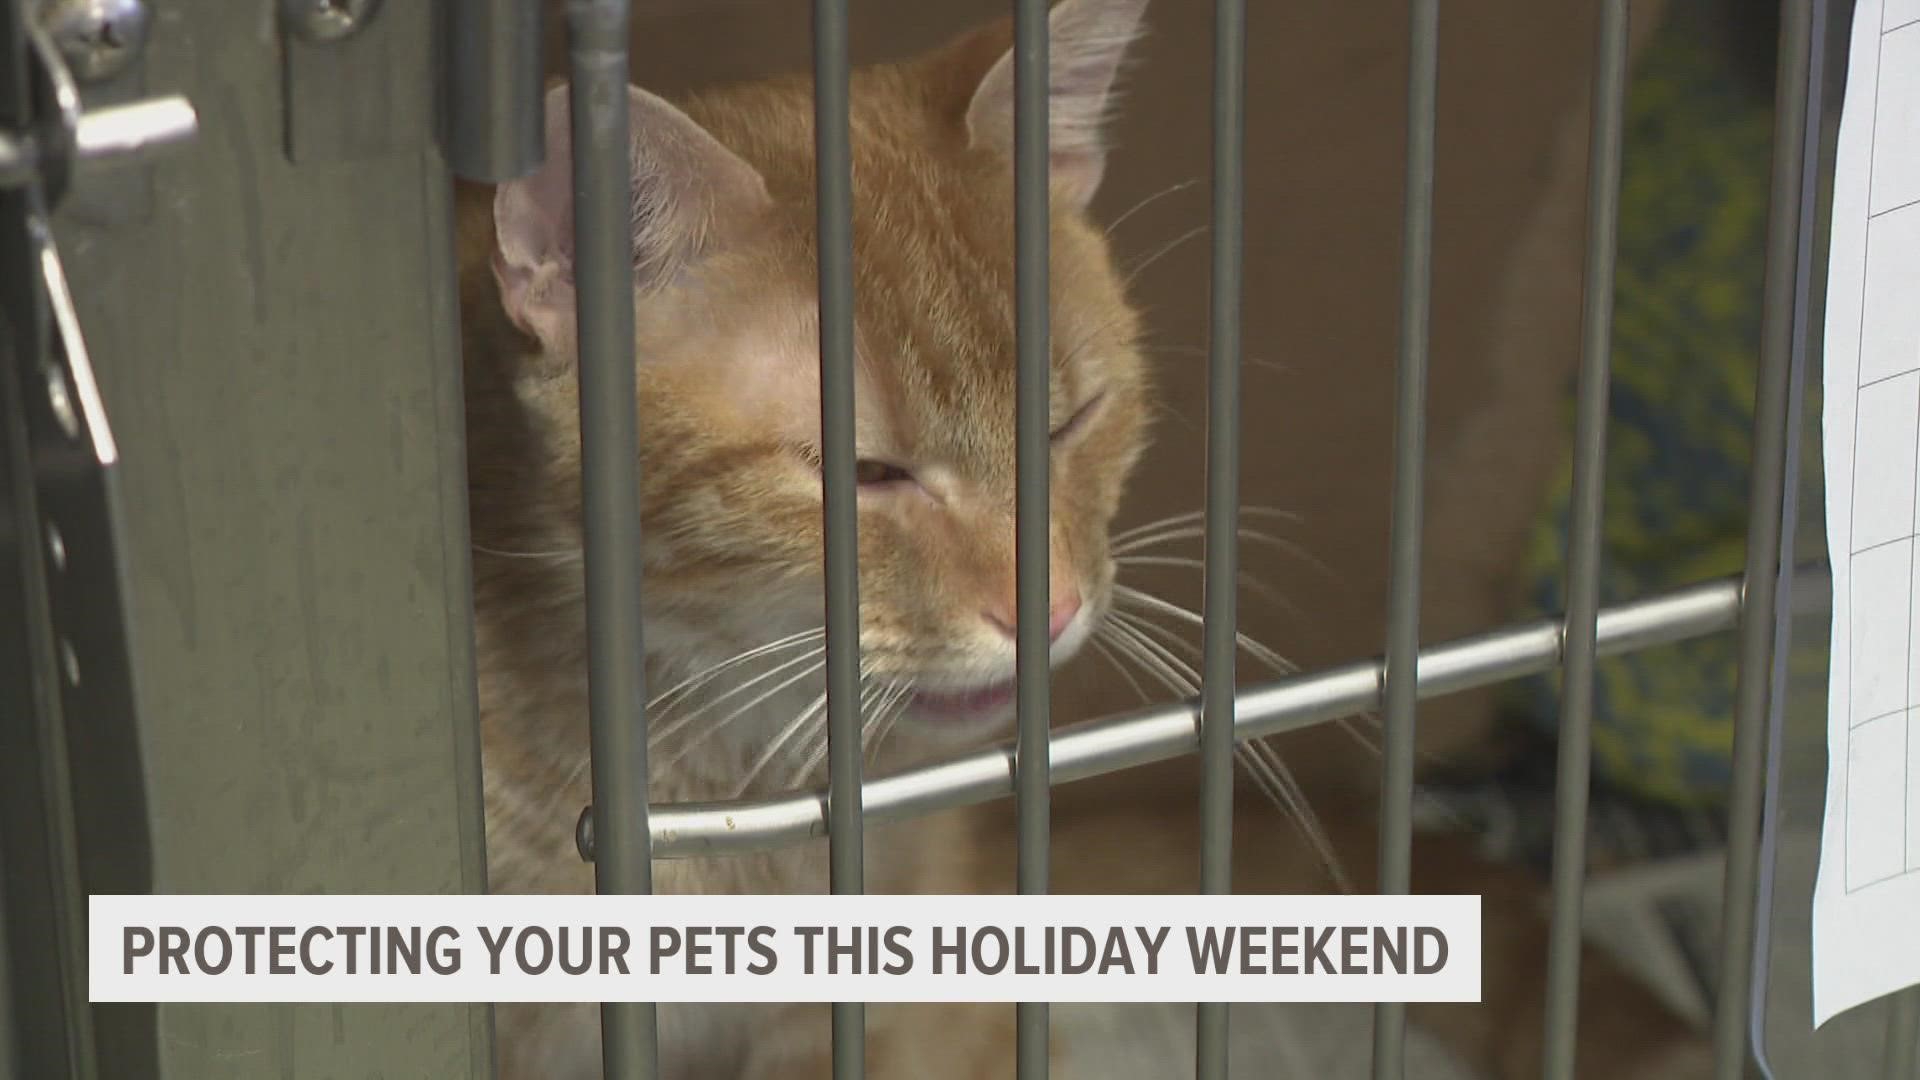 Experts recommend keeping your pets inside for the weekend, as fireworks may cause them to flee and get lost.